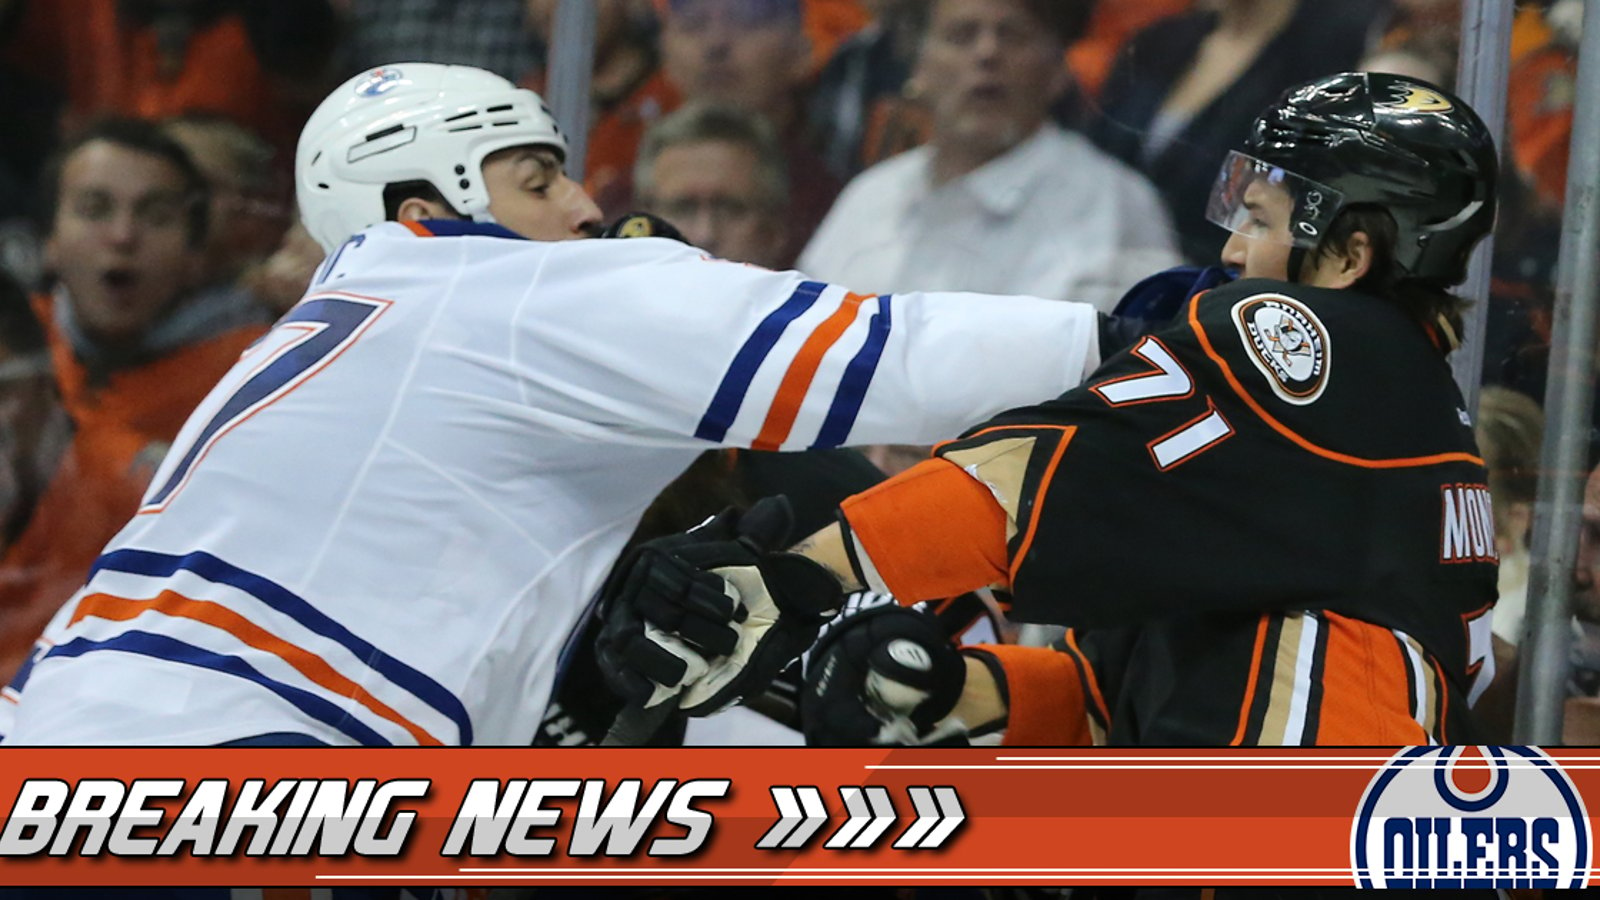 BREAKING: Milan Lucic tells it like it is after the Oilers take a 2-0 lead against the Ducks.